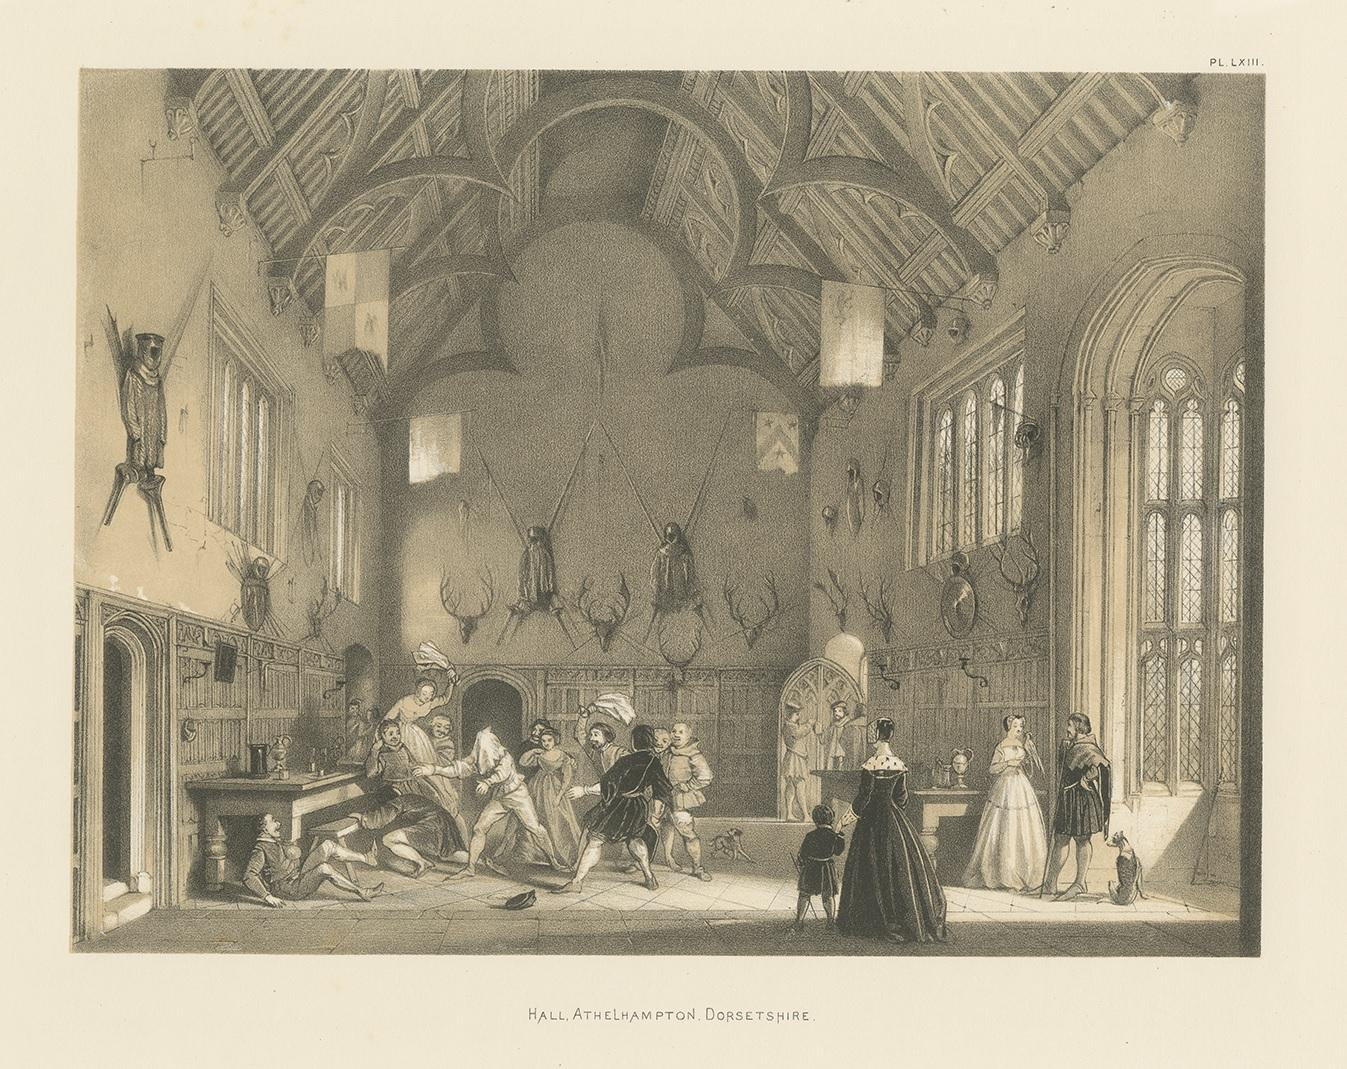 Antique print titled 'Hall. Athelhampton. Dorsetshire'. Lithograph of the Great Hall of Athelhampton House. Athelhampton House is a Tudor Manor in Dorset, England. This print originates from 'The Mansions of England in the Olden Time' by Joseph Nash.